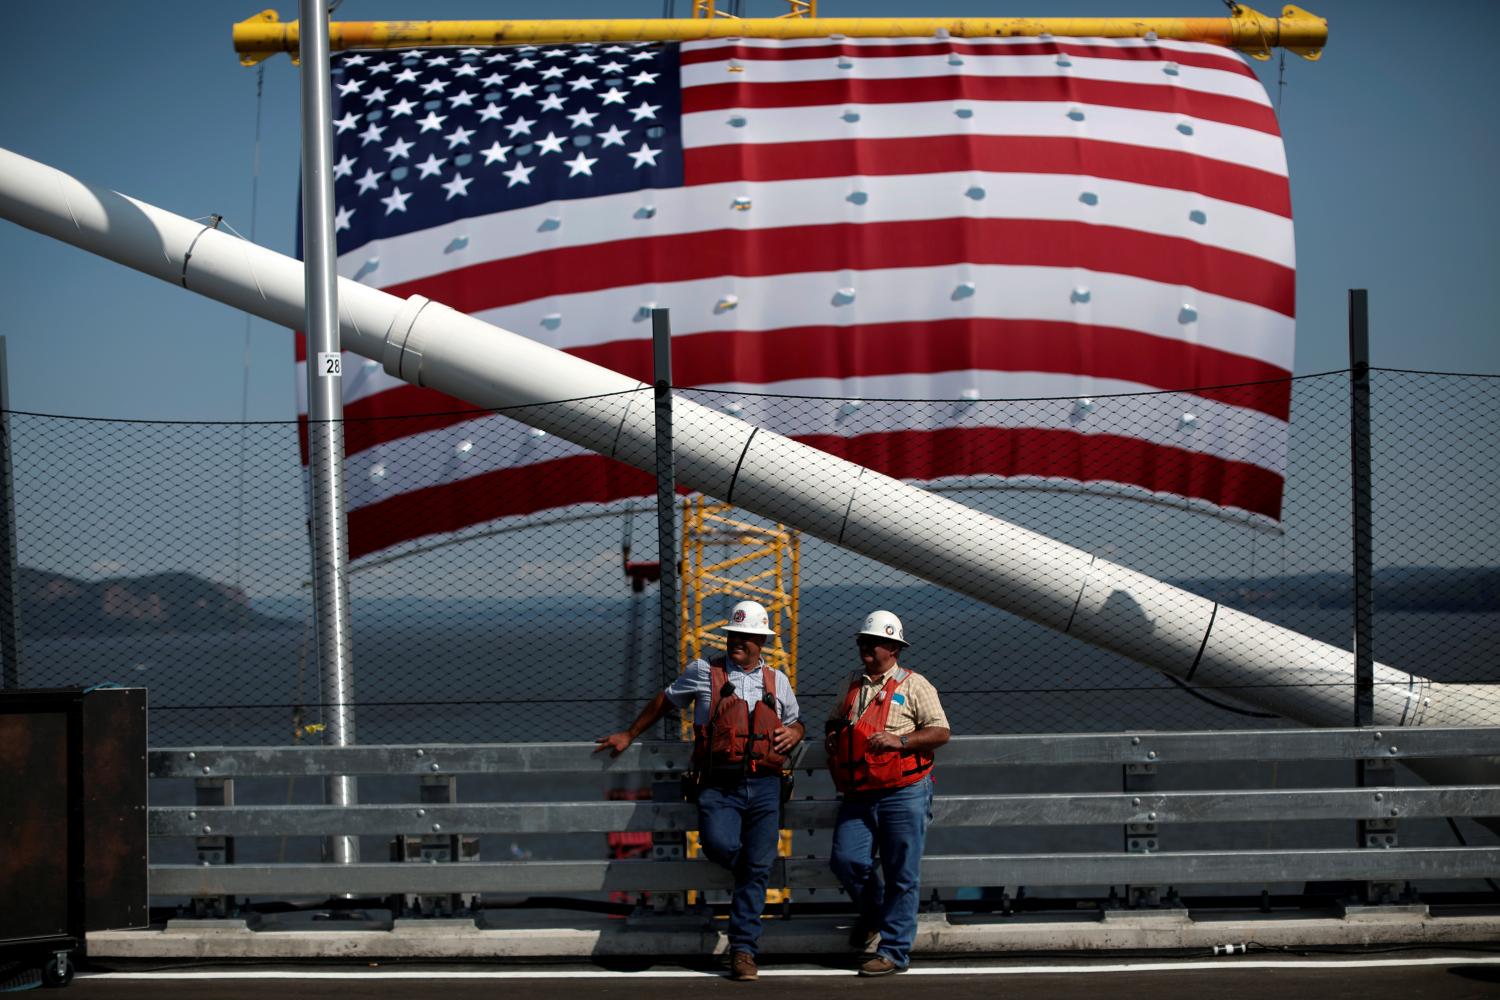 Ironworkers and brothers Randy (L) and Peter Meche, stand by during a dedication ceremony for the new Governor Mario M. Cuomo Bridge that is to replace the current Tappan Zee Bridge over the Hudson River in Tarrytown, New York, U.S., August 24, 2017. REUTERS/Mike Segar - RC1A71EE0590